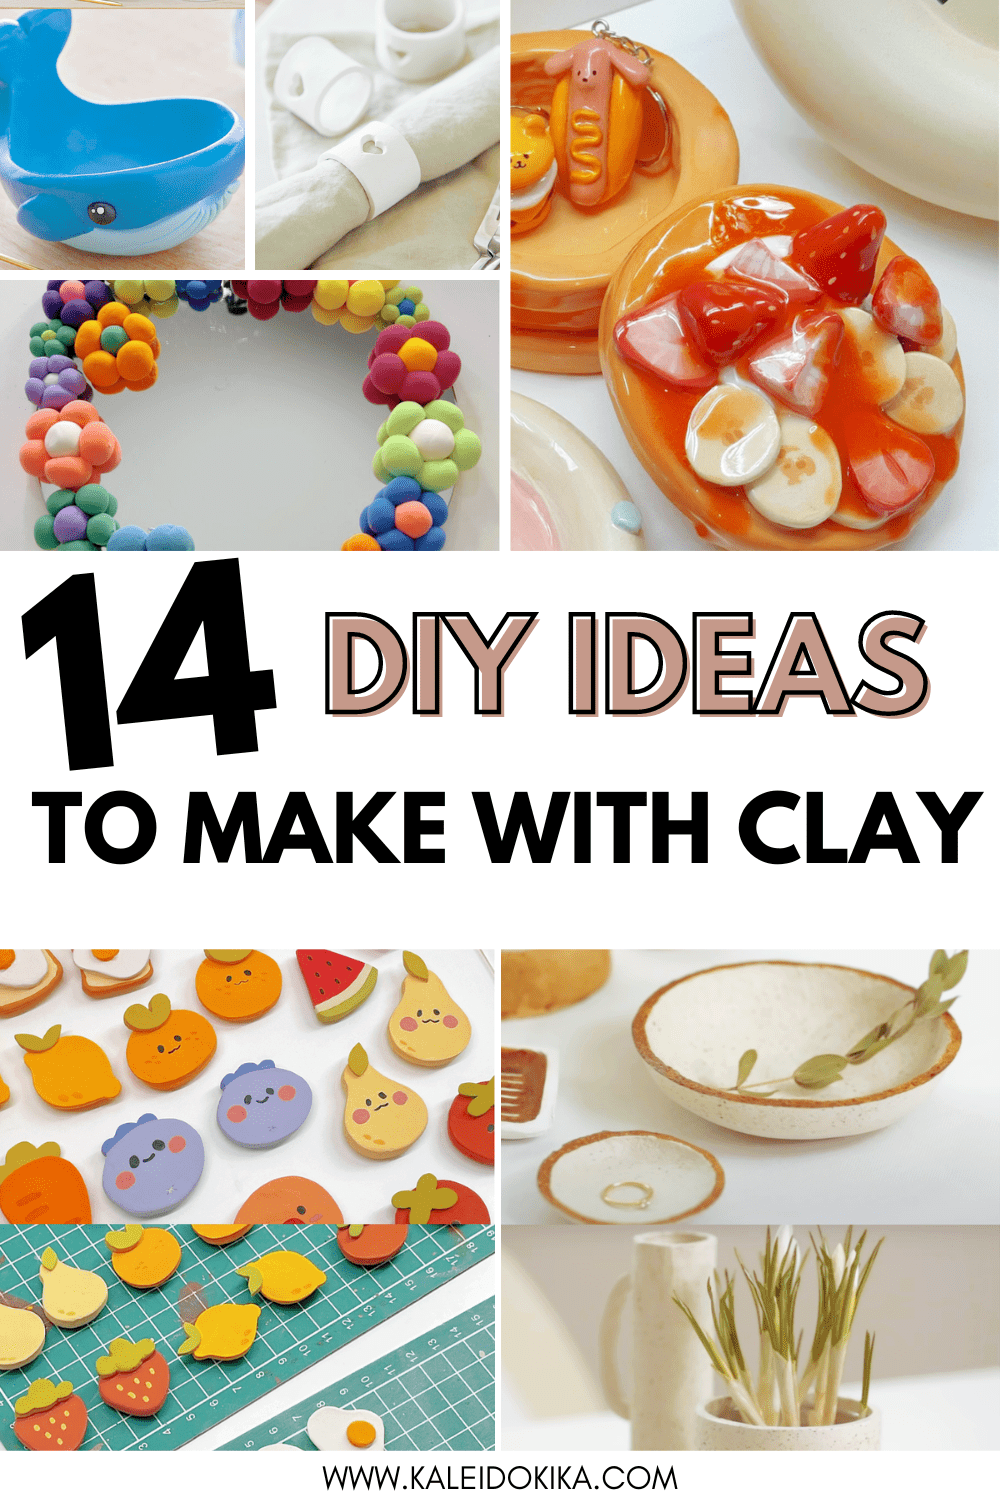 Image showing multiple DIY projects made out of clay